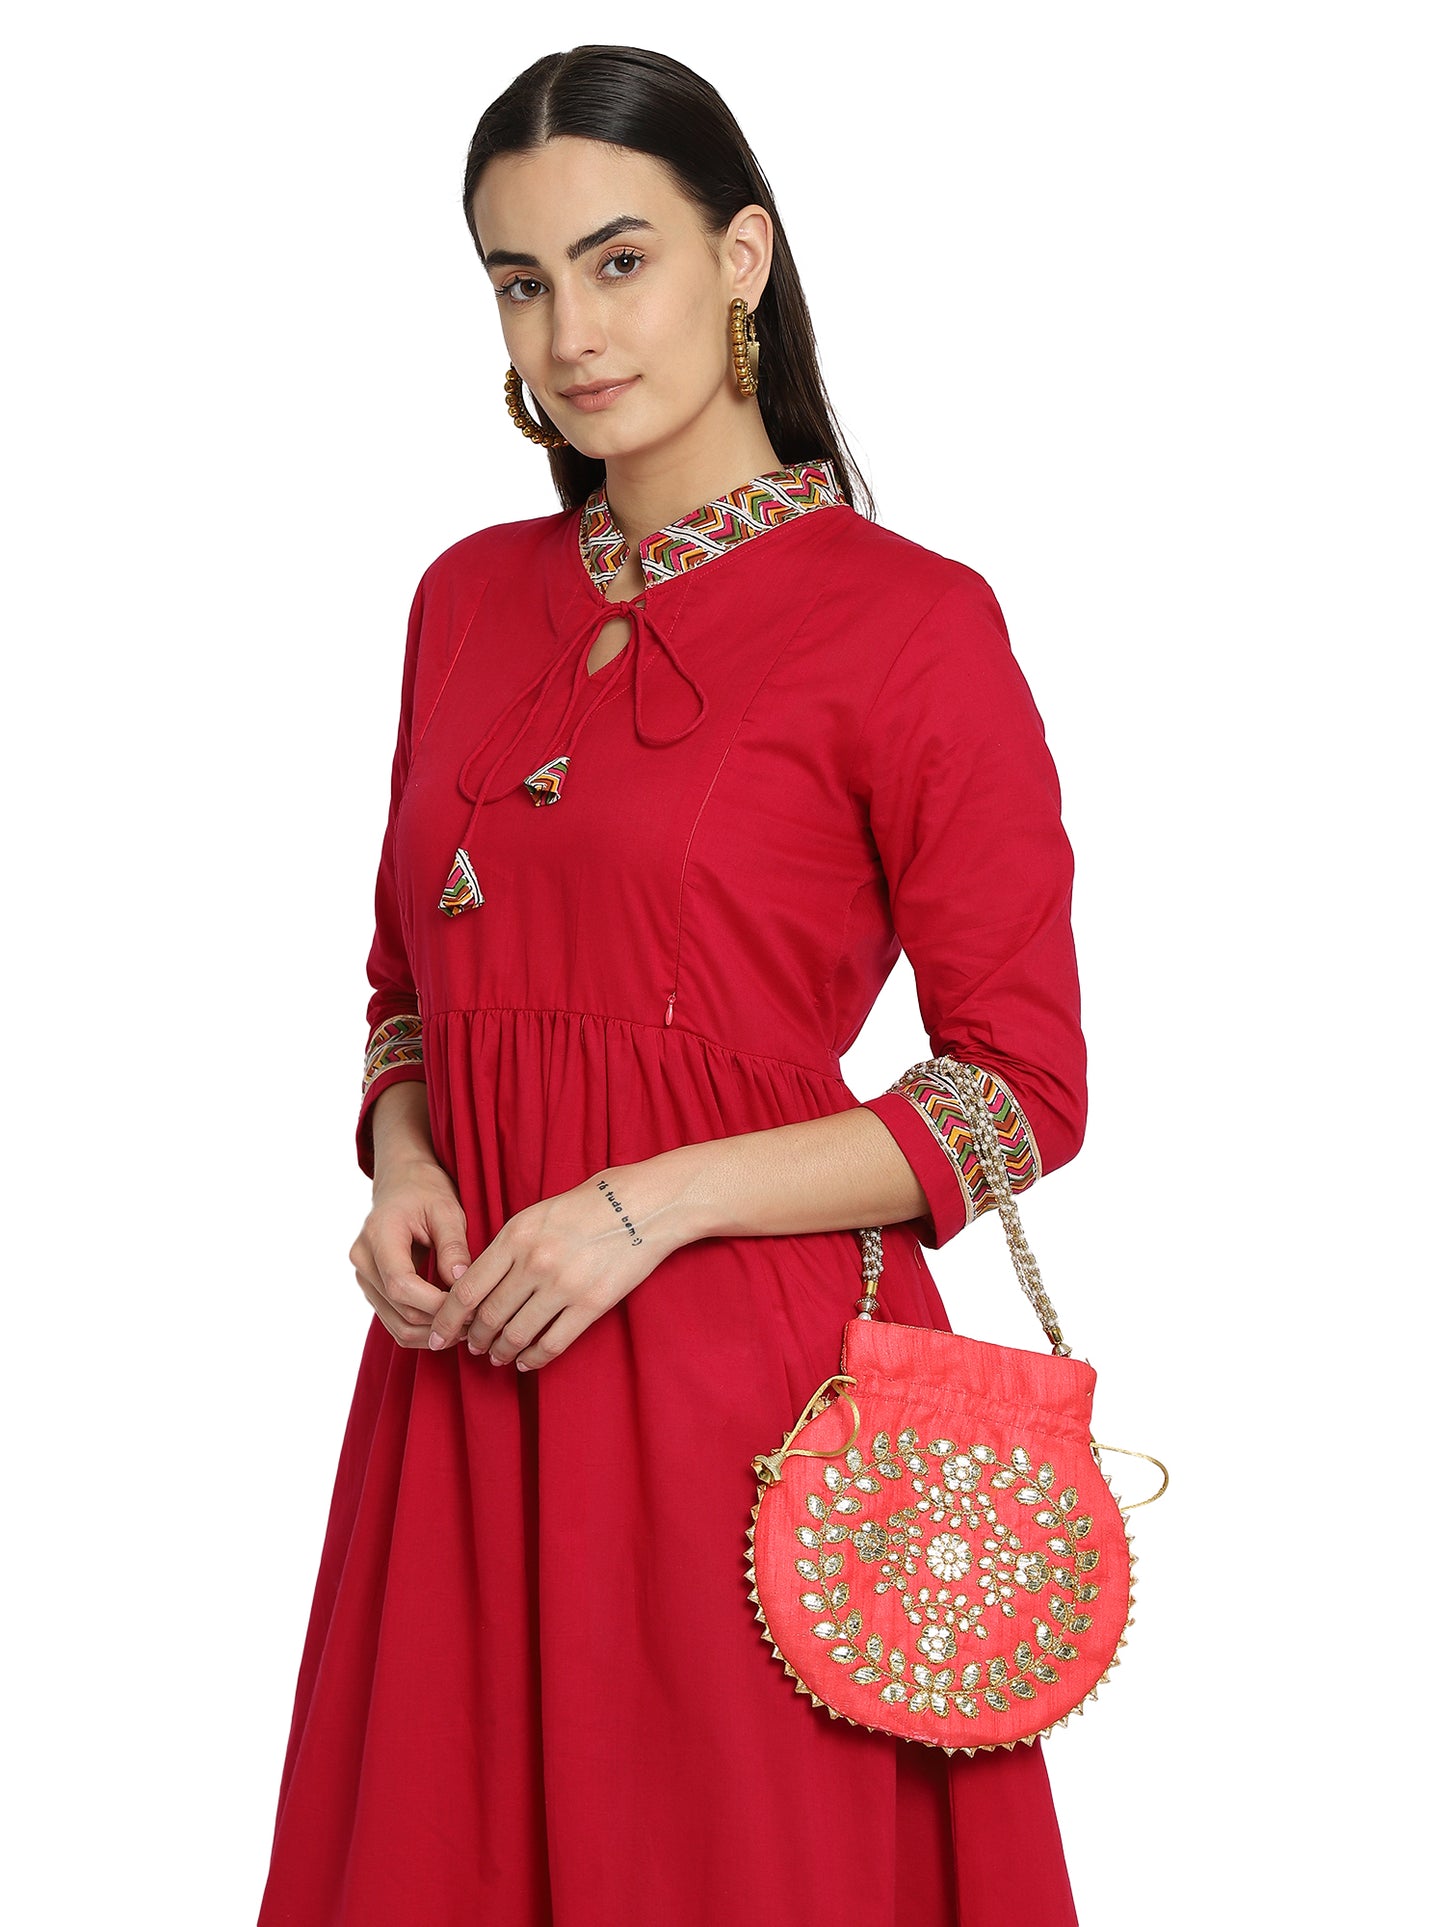 Red Potli Bag With Golden Embroidery